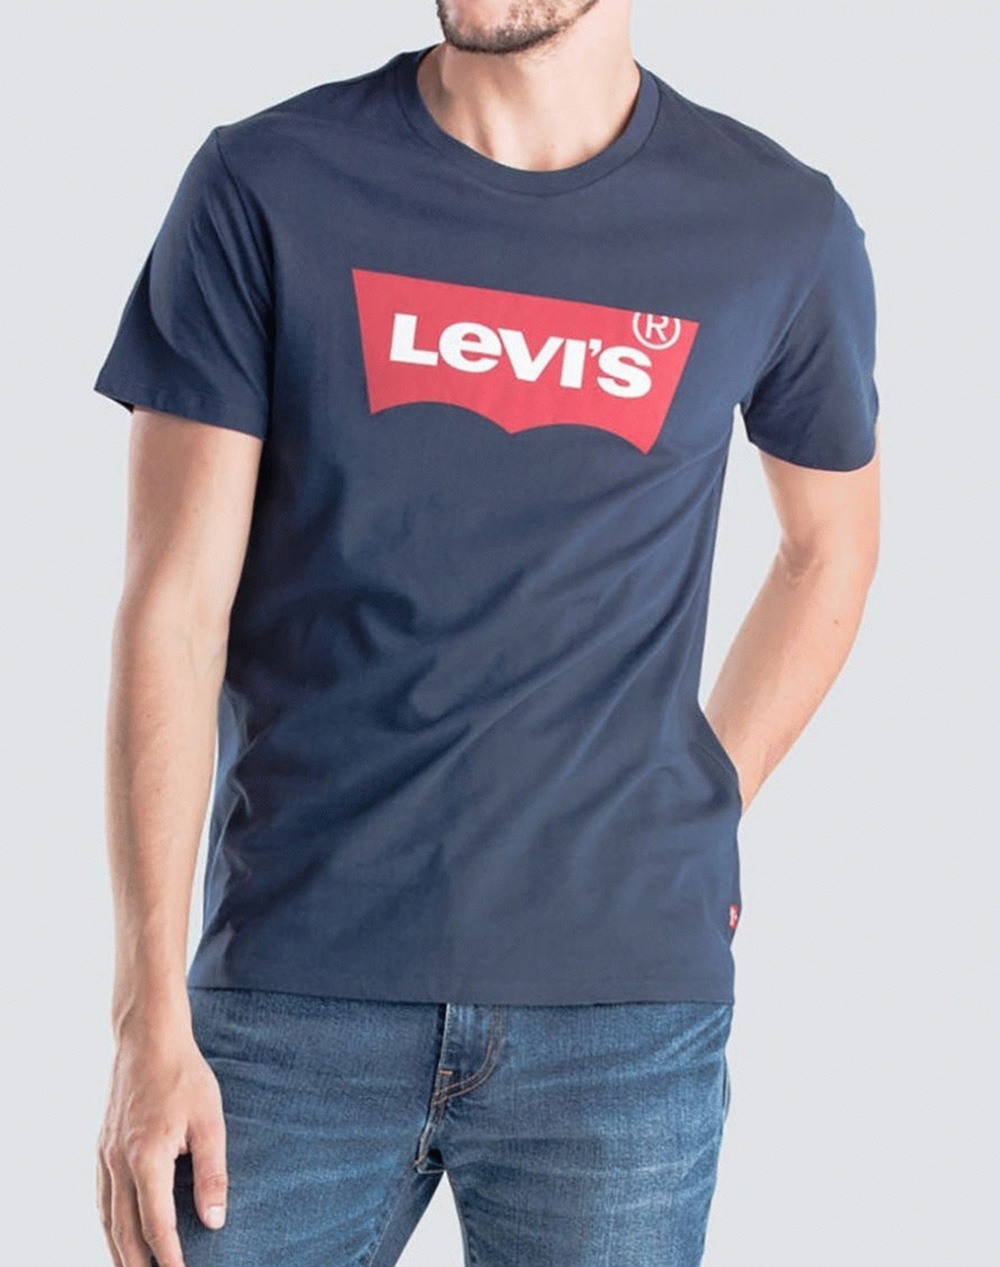 LEVIS T-SHIRT GRAPHIC SET-IN NECK 17783-0139-0139 NavyBlue